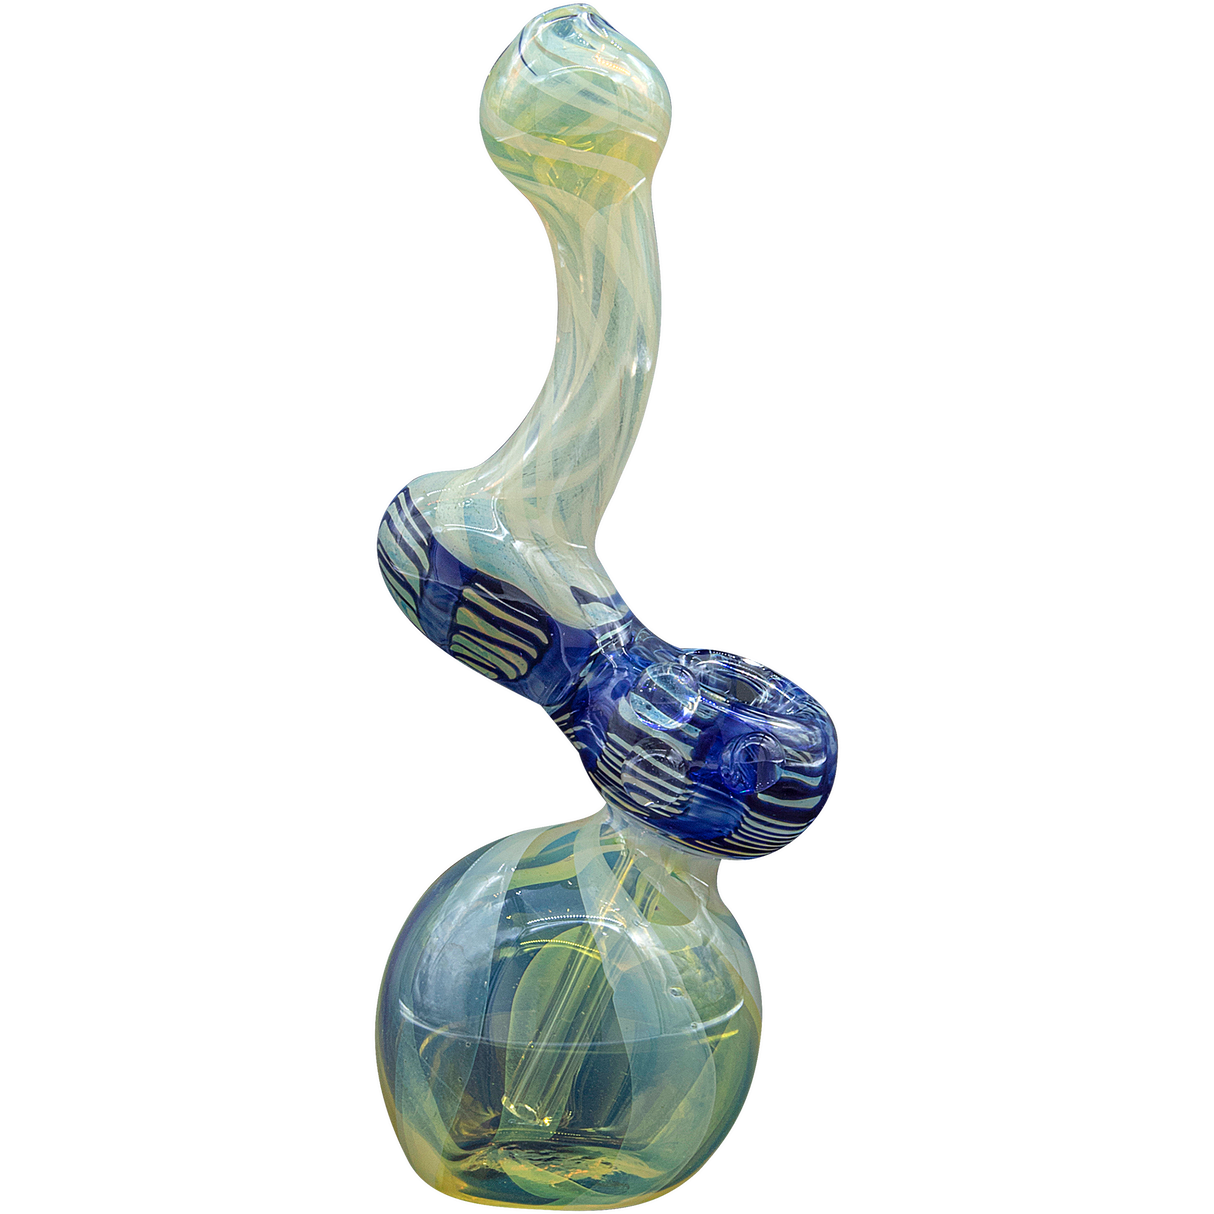 LA Pipes "Rake Bubb" Fumed Sherlock Bubbler Pipe in Blue, Front View on White Background